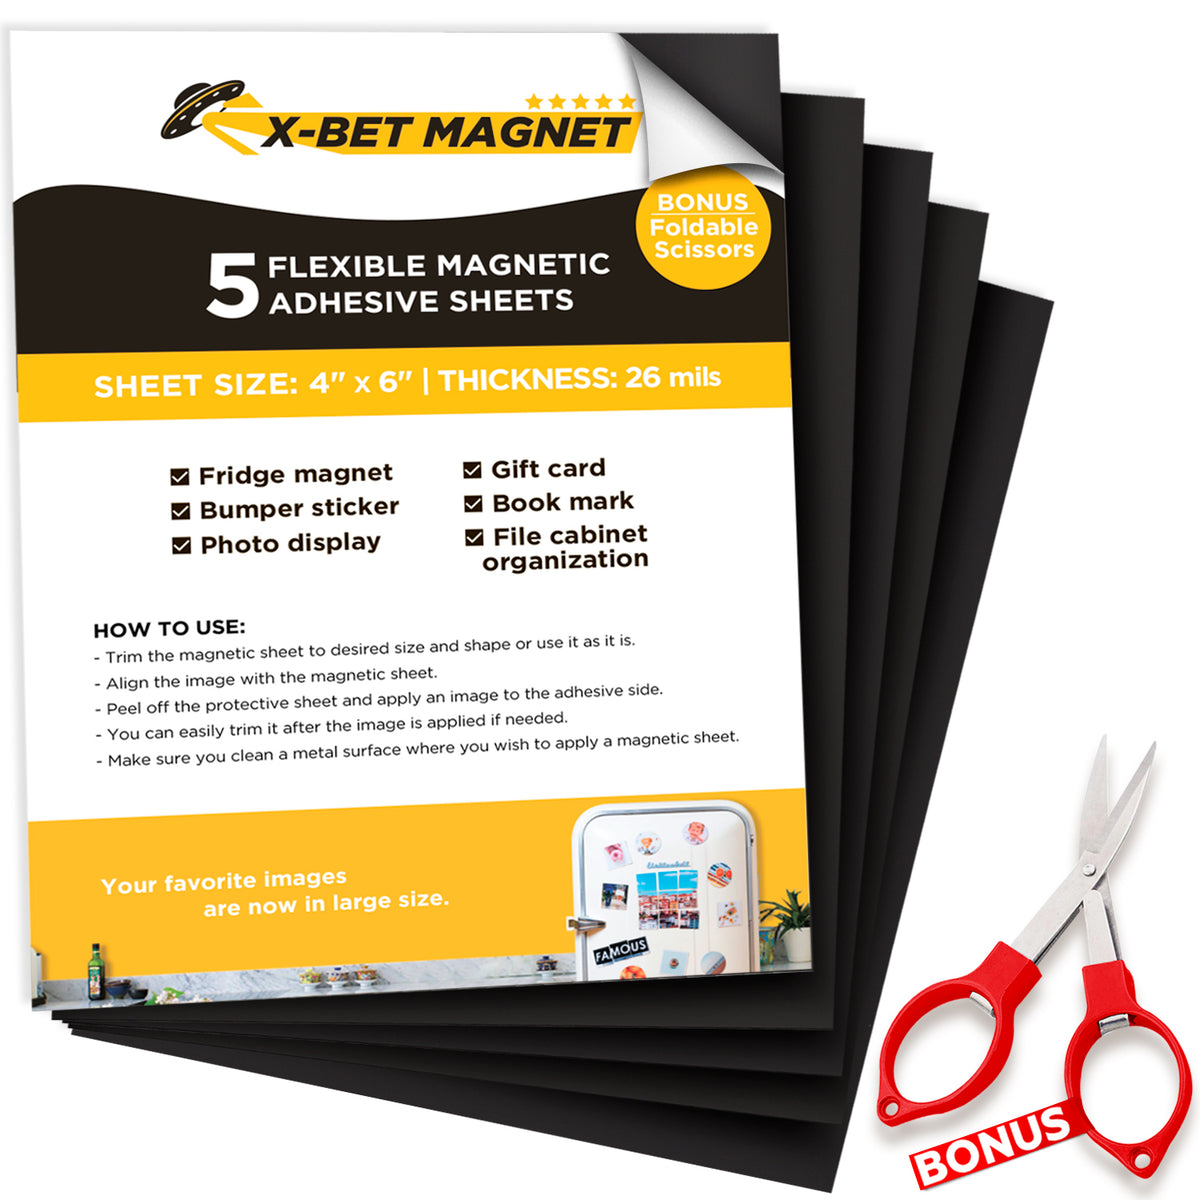 Strong Flexible Self-Adhesive Magnetic Sheets 4x6 Magnetic Sheets with Adhesive Backing 20mil DIY Photo Frame Ablum 10 Sheets, Size: 4 x 6, White